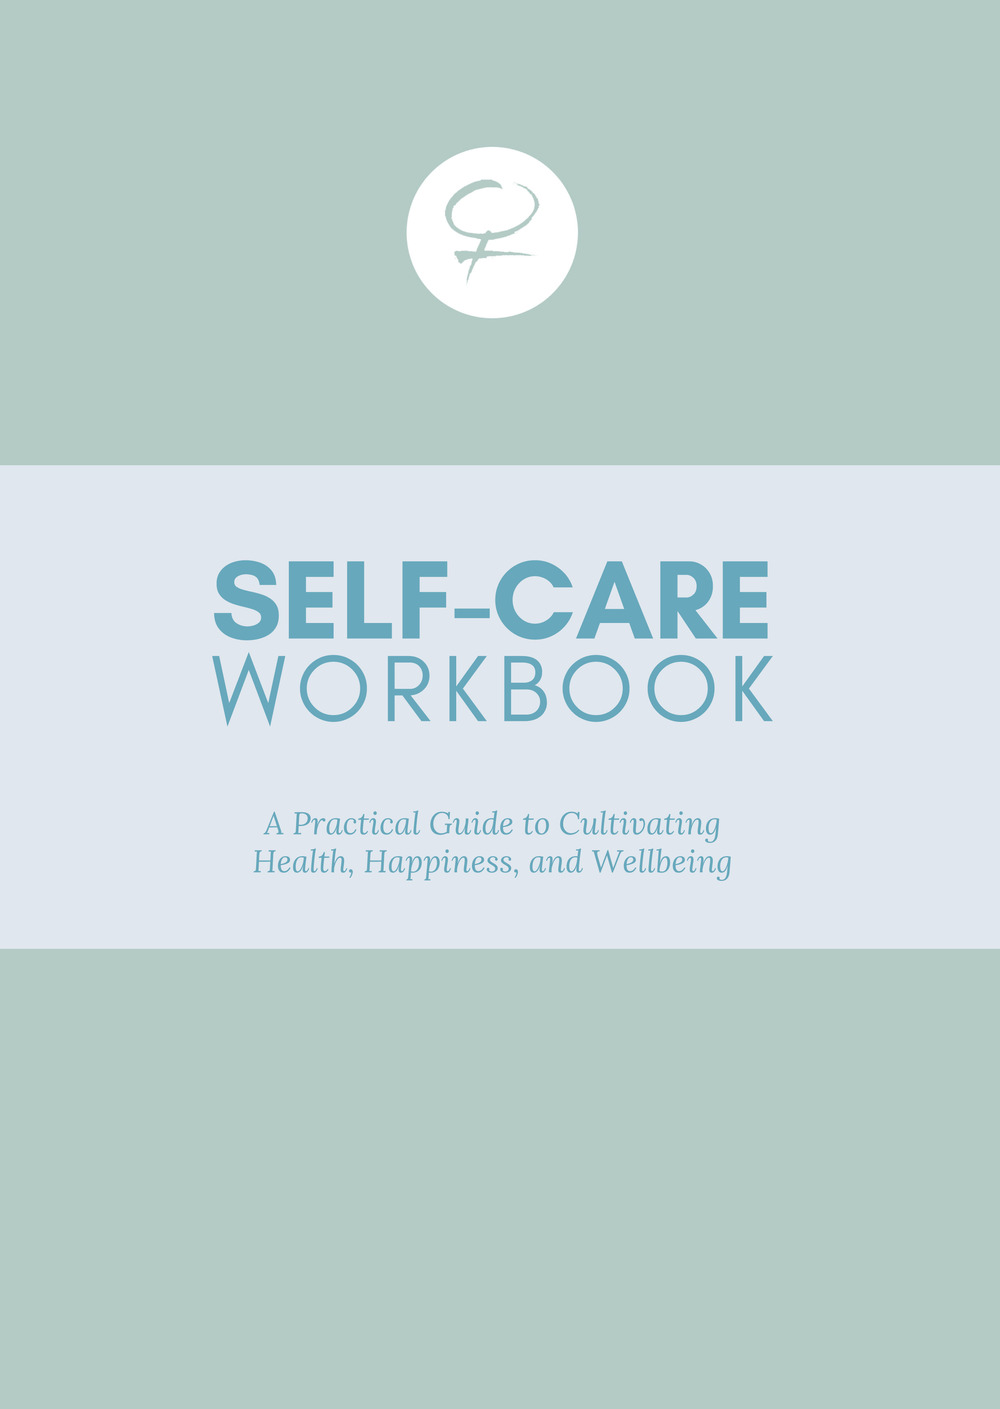 Self care workbook. A practical guide to cultivating health, happiness, and wellbeing